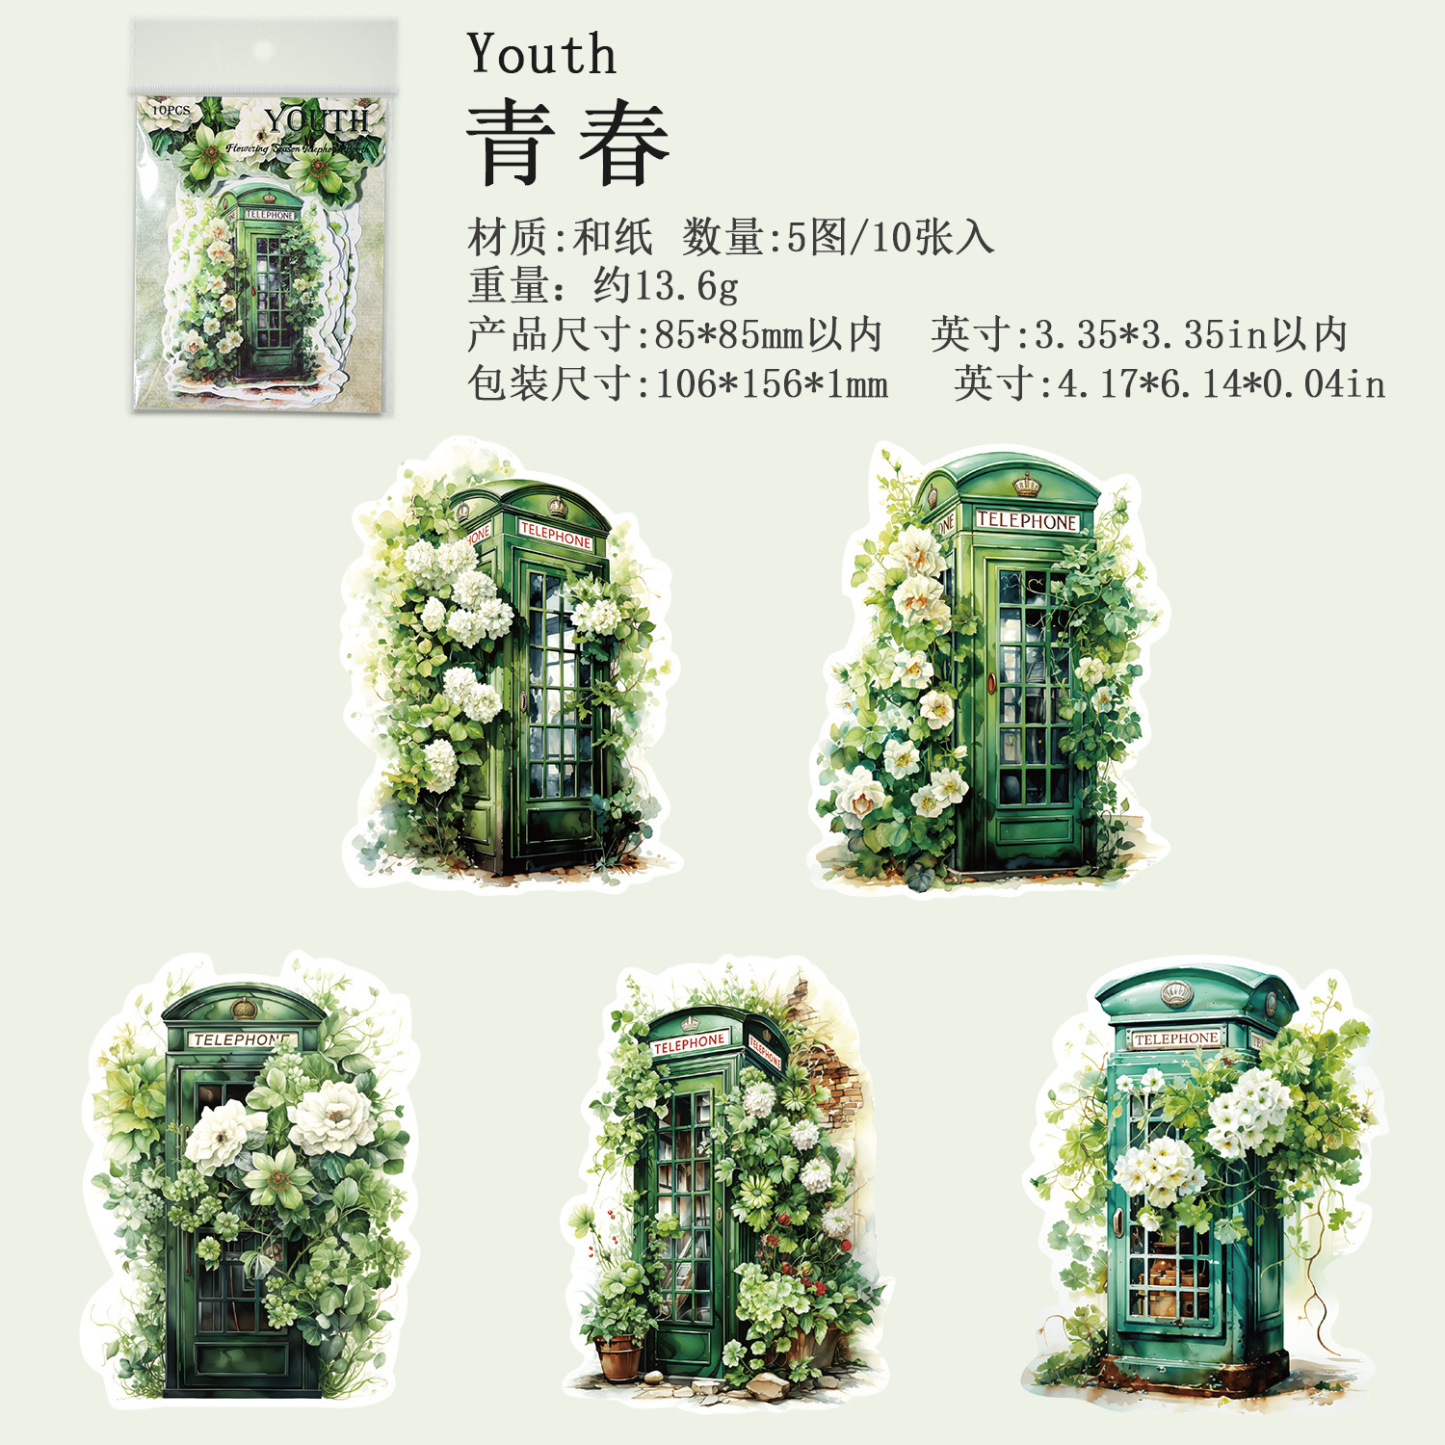 10pcs/pack flower phone booth theme stickers for scrapbook decoration crafts junk journal